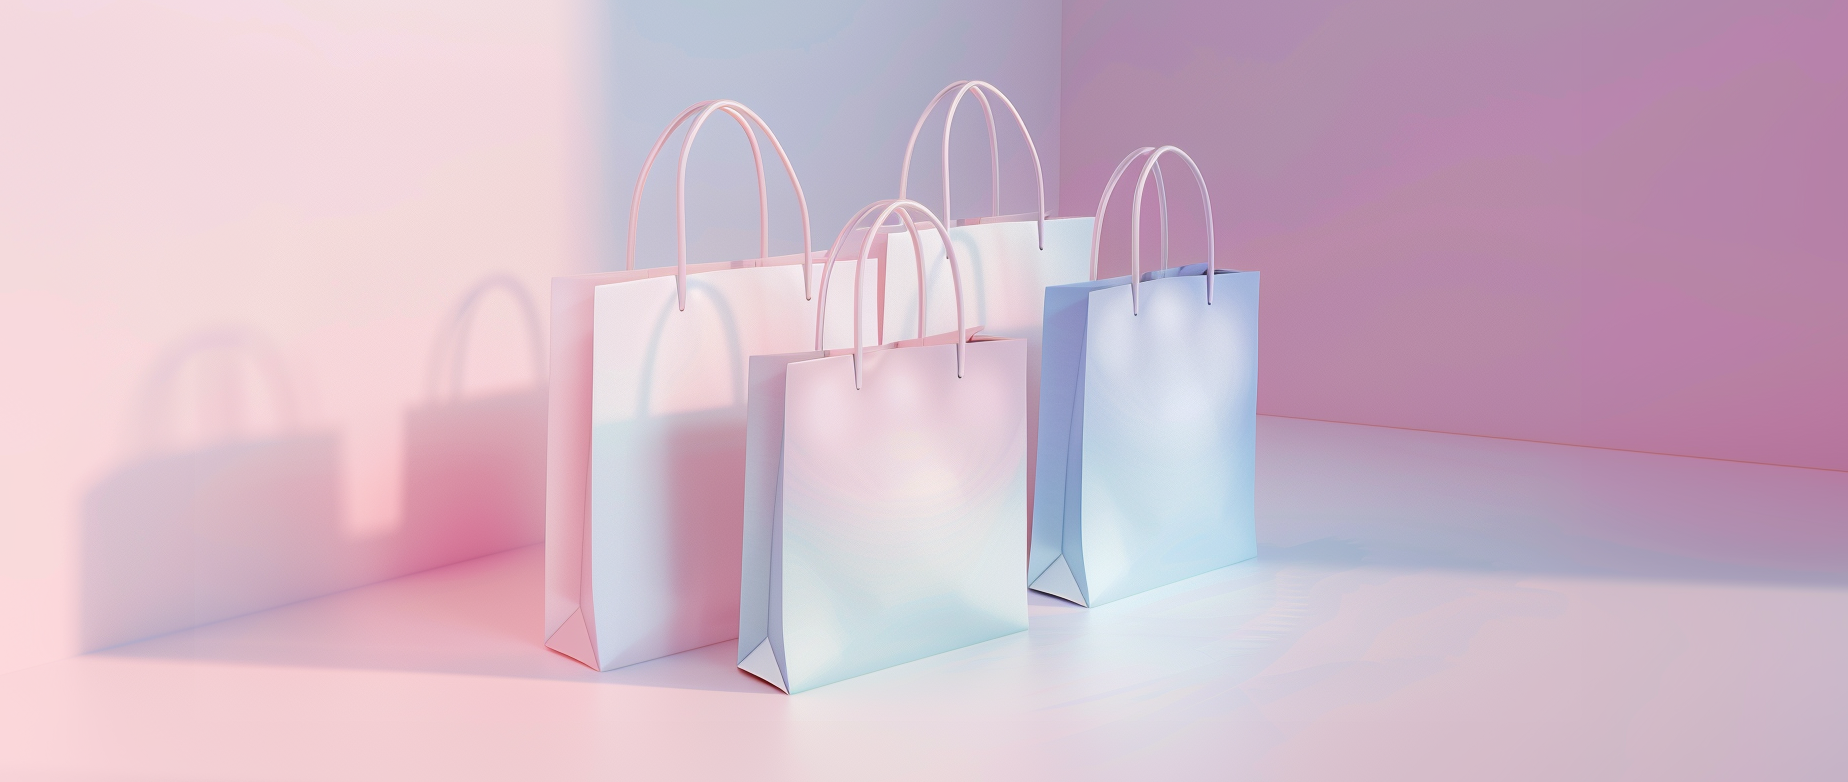 Four white shopping bags in a corner with pink and blue lighting.